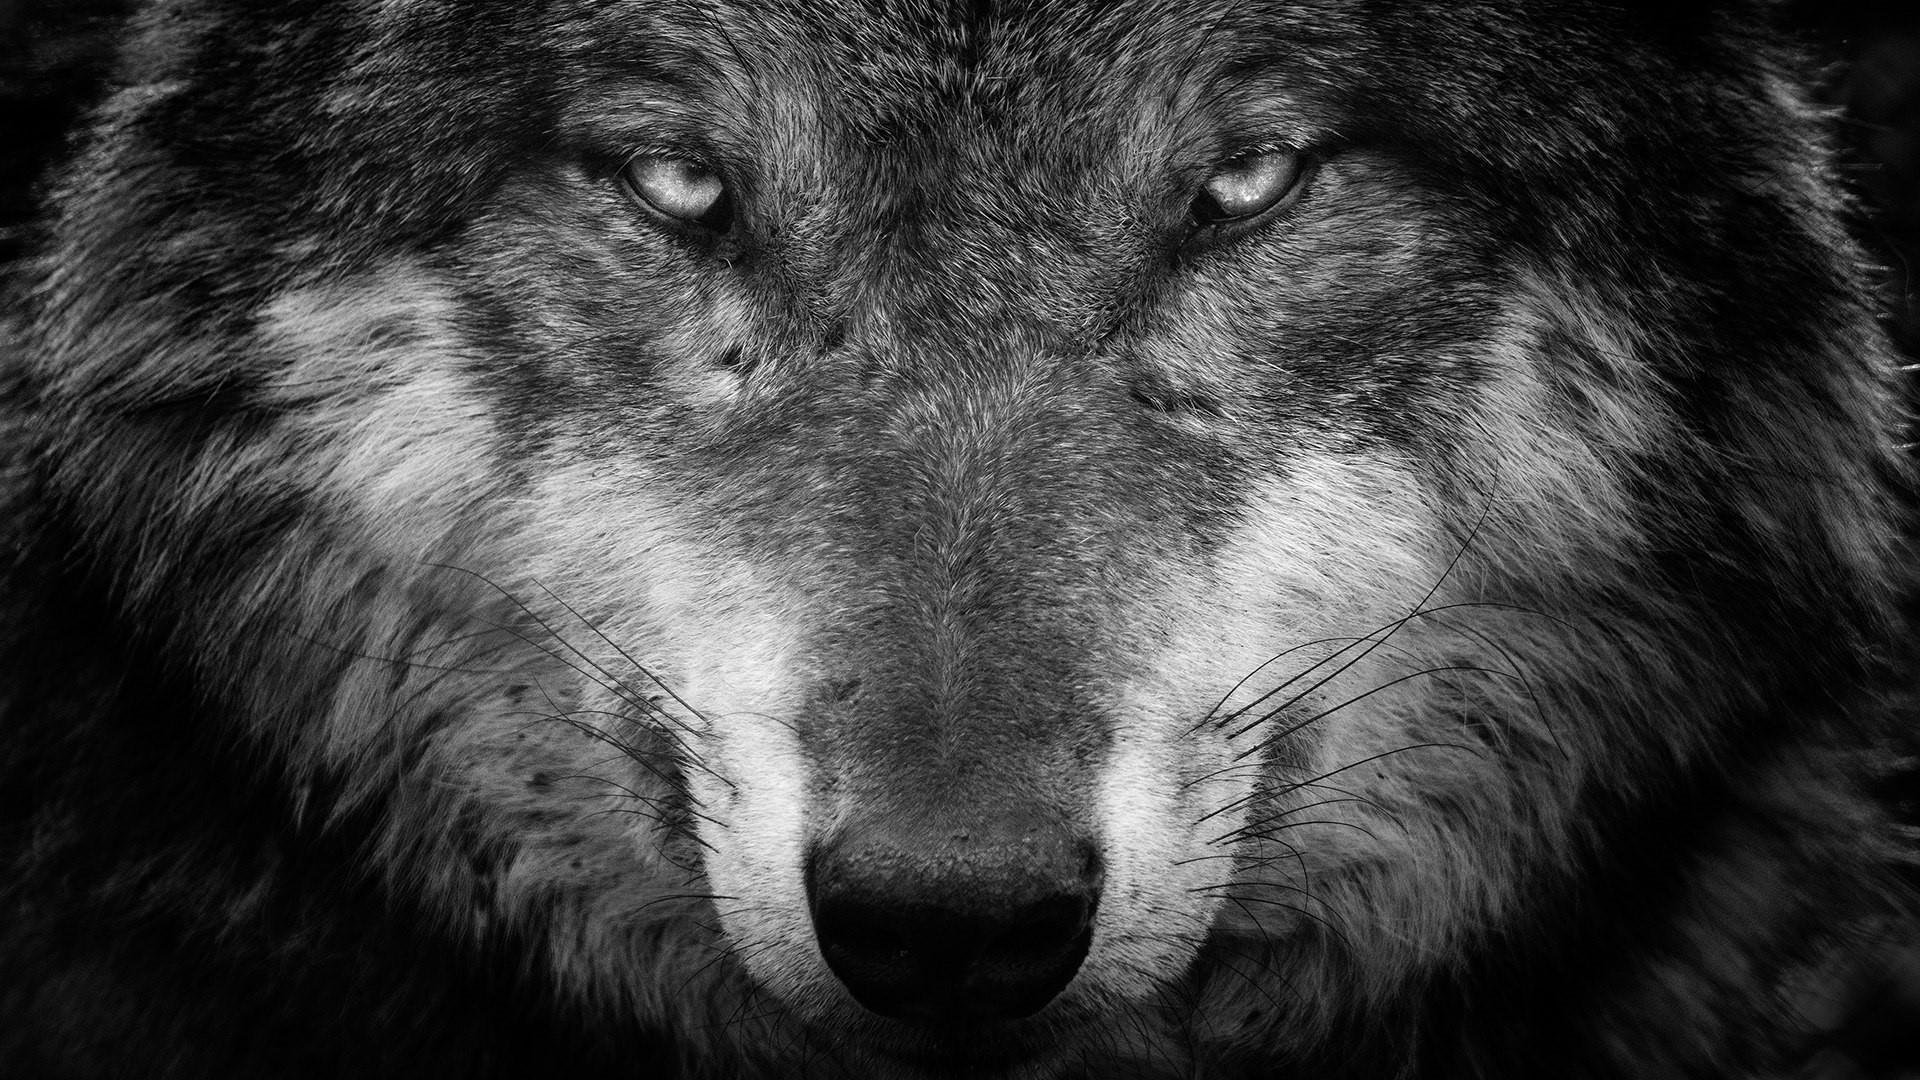  Wolf  black  and white  portrait wallpaper  backiee